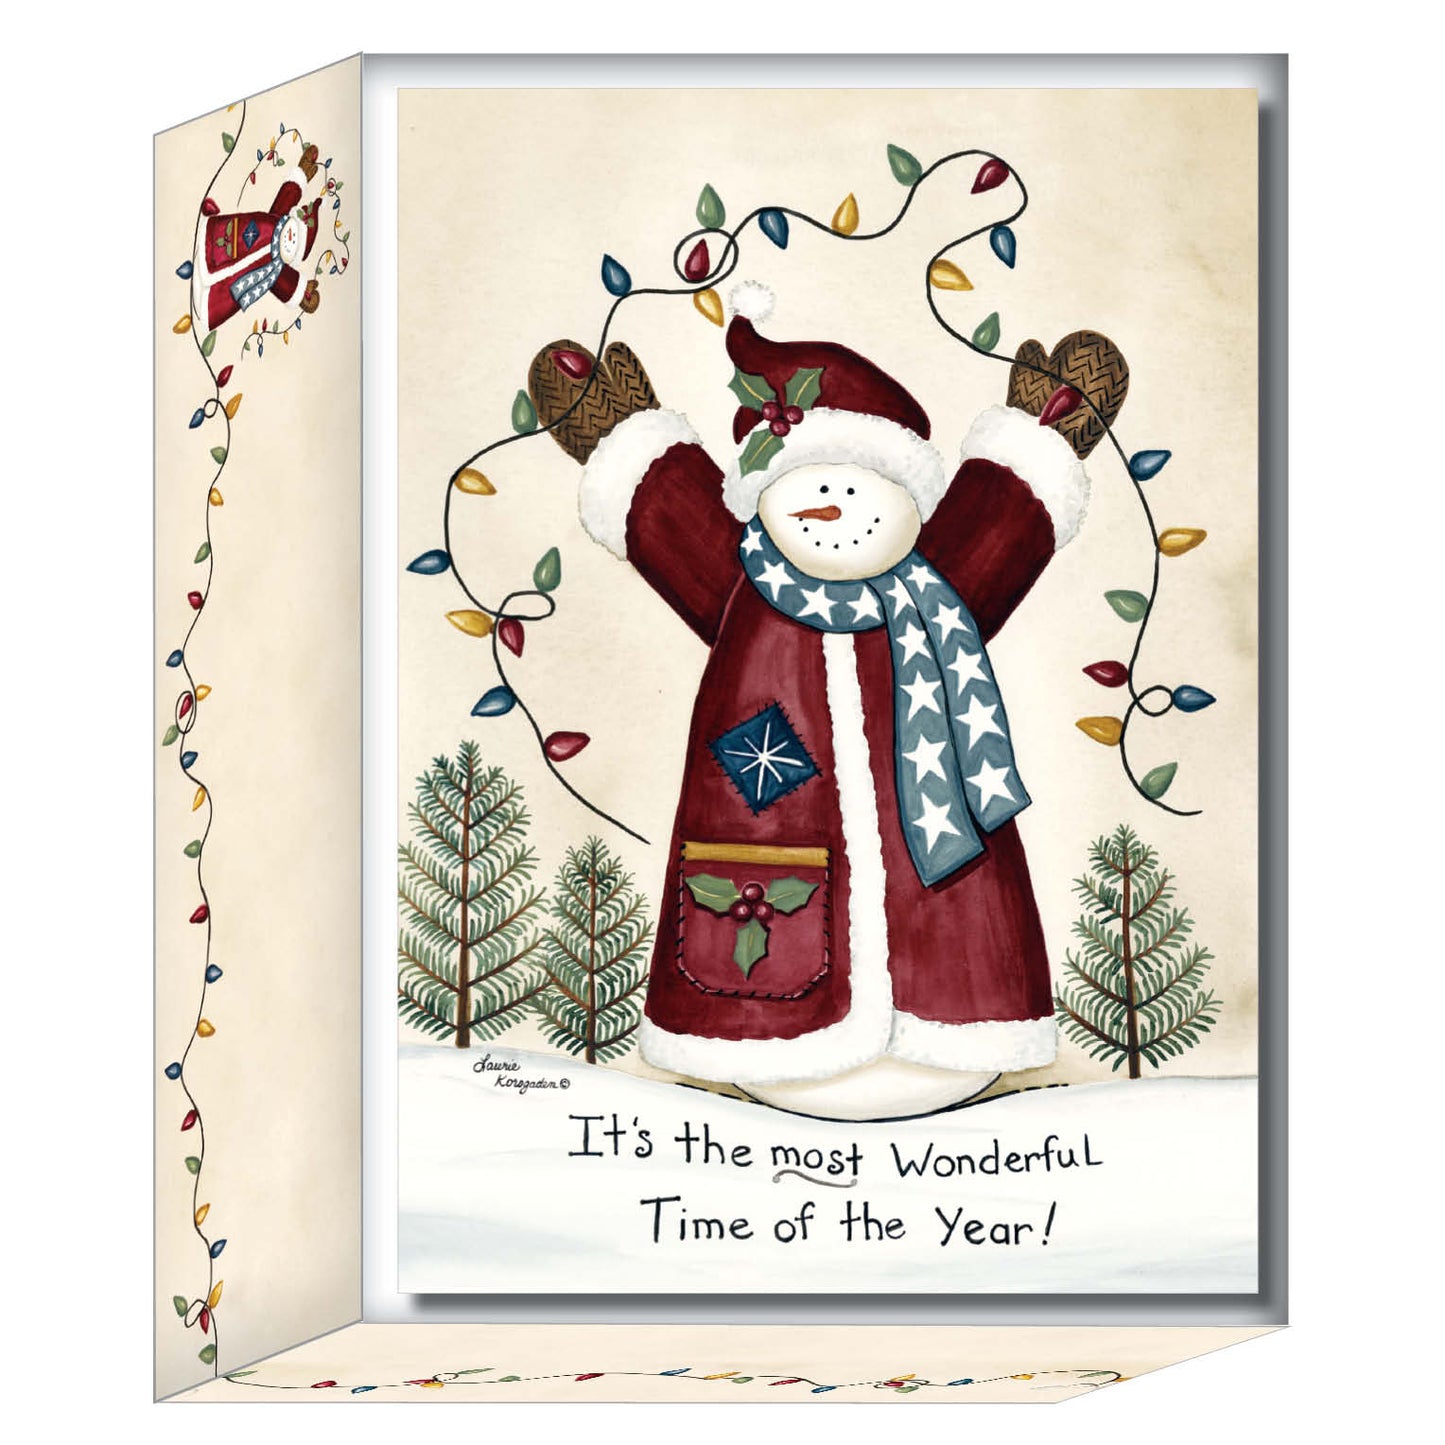 Snowman with String of Lights -30 Boxed Christmas Cards